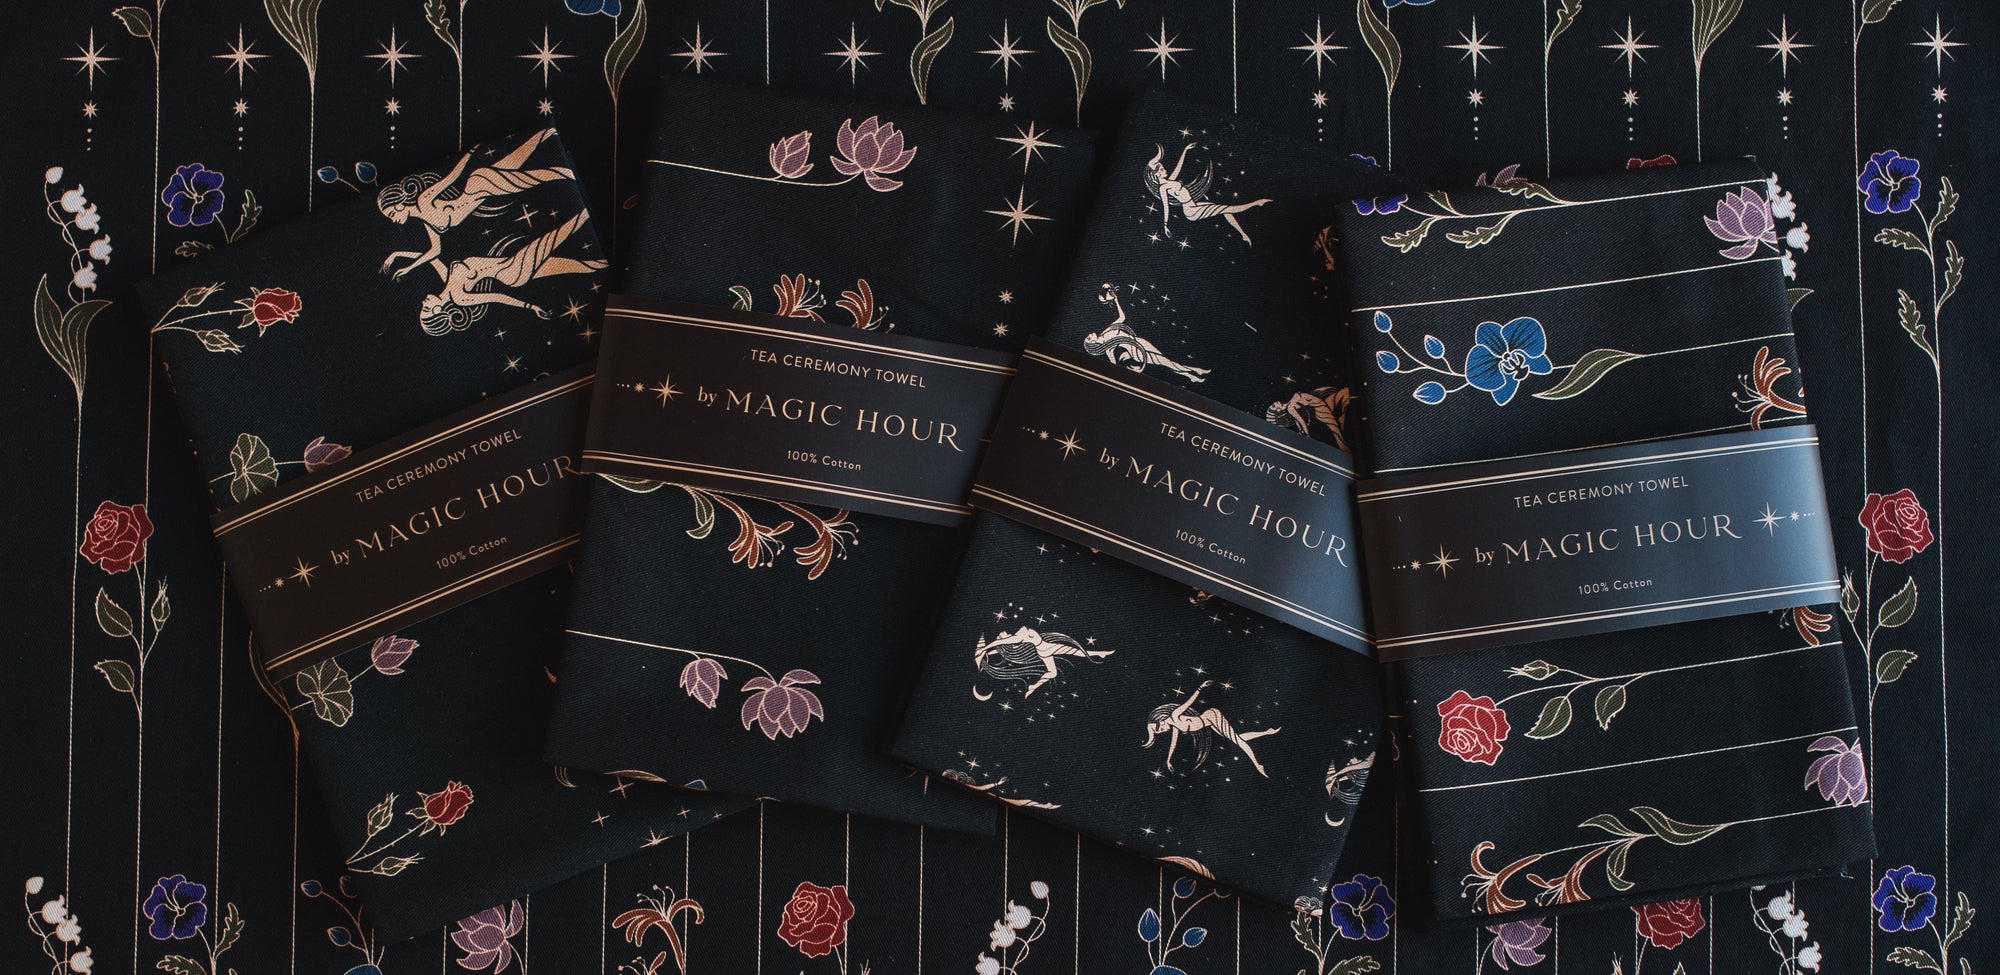 A display of four neatly folded Tea Ceremony Towels Bundle, each wrapped with a label reading "Magic Hour." The towels feature various floral and celestial designs in vibrant colors, placed on a fabric backdrop adorned with intricate floral and star patterns.